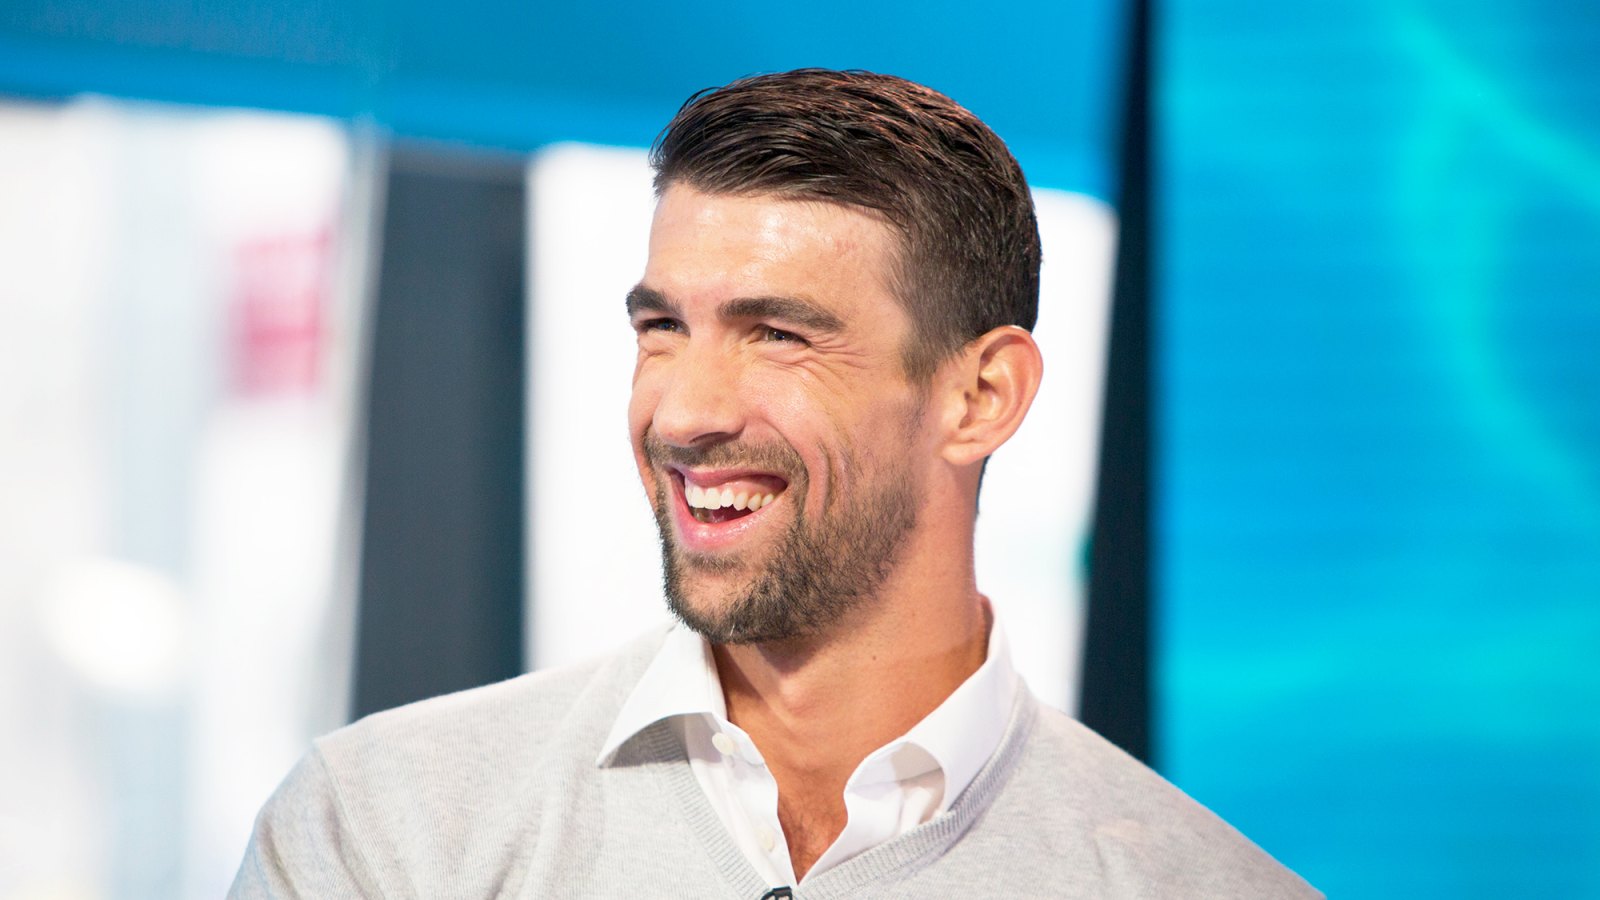 Michael Phelps on ‘Today‘ show